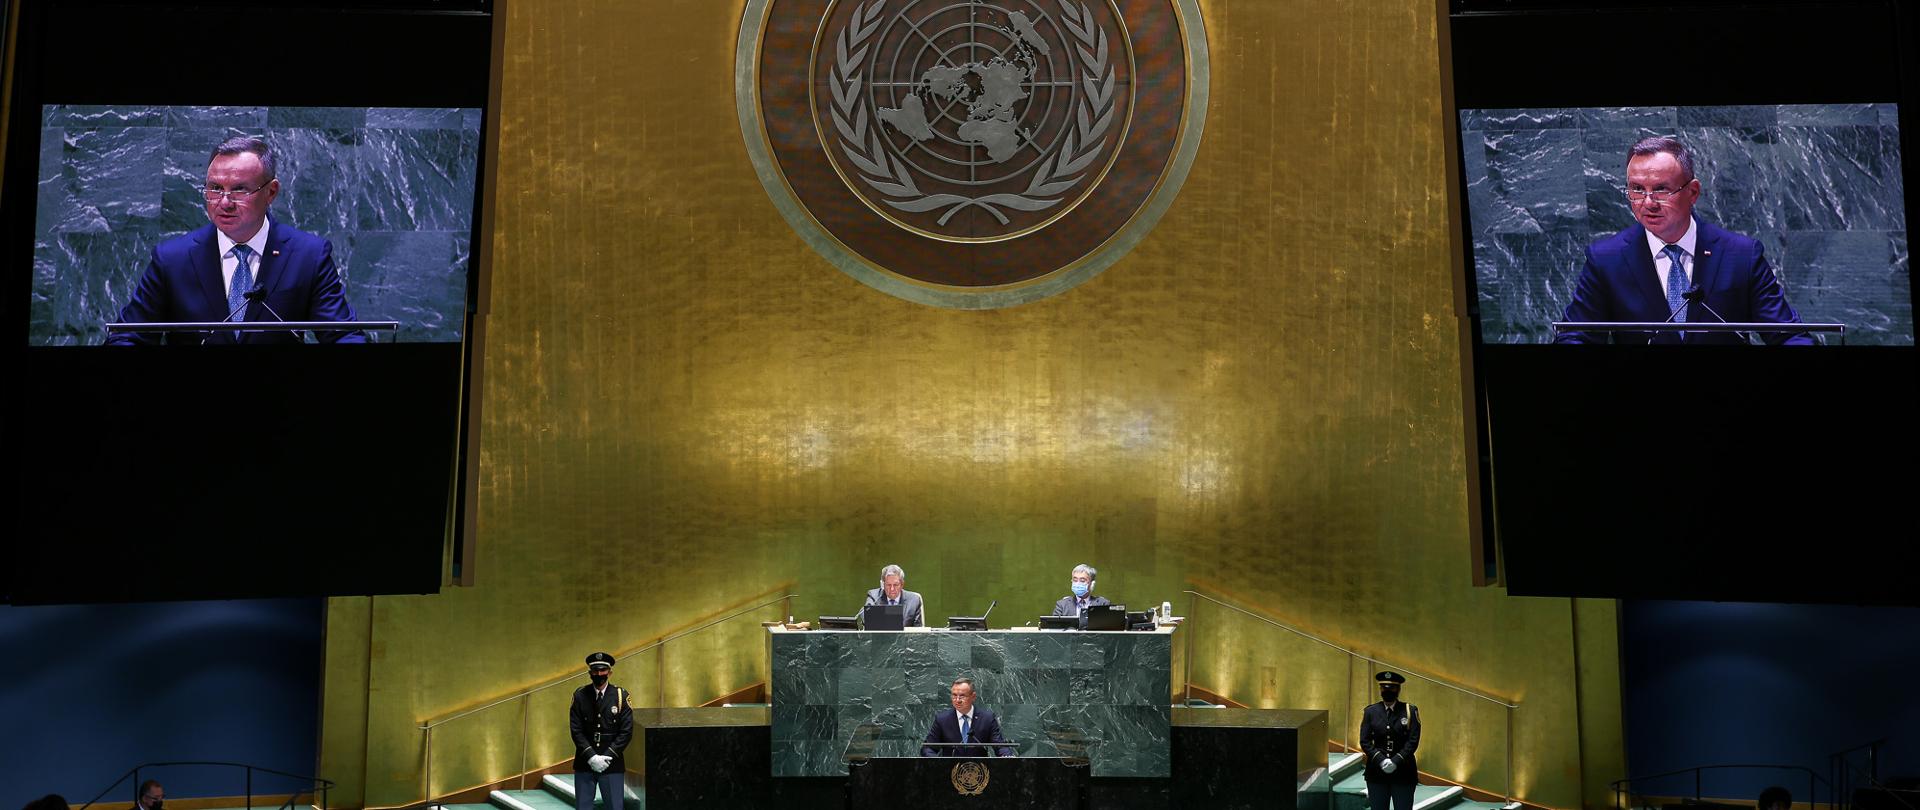 Speech by the President at the 76th Session of the UN General Assembly